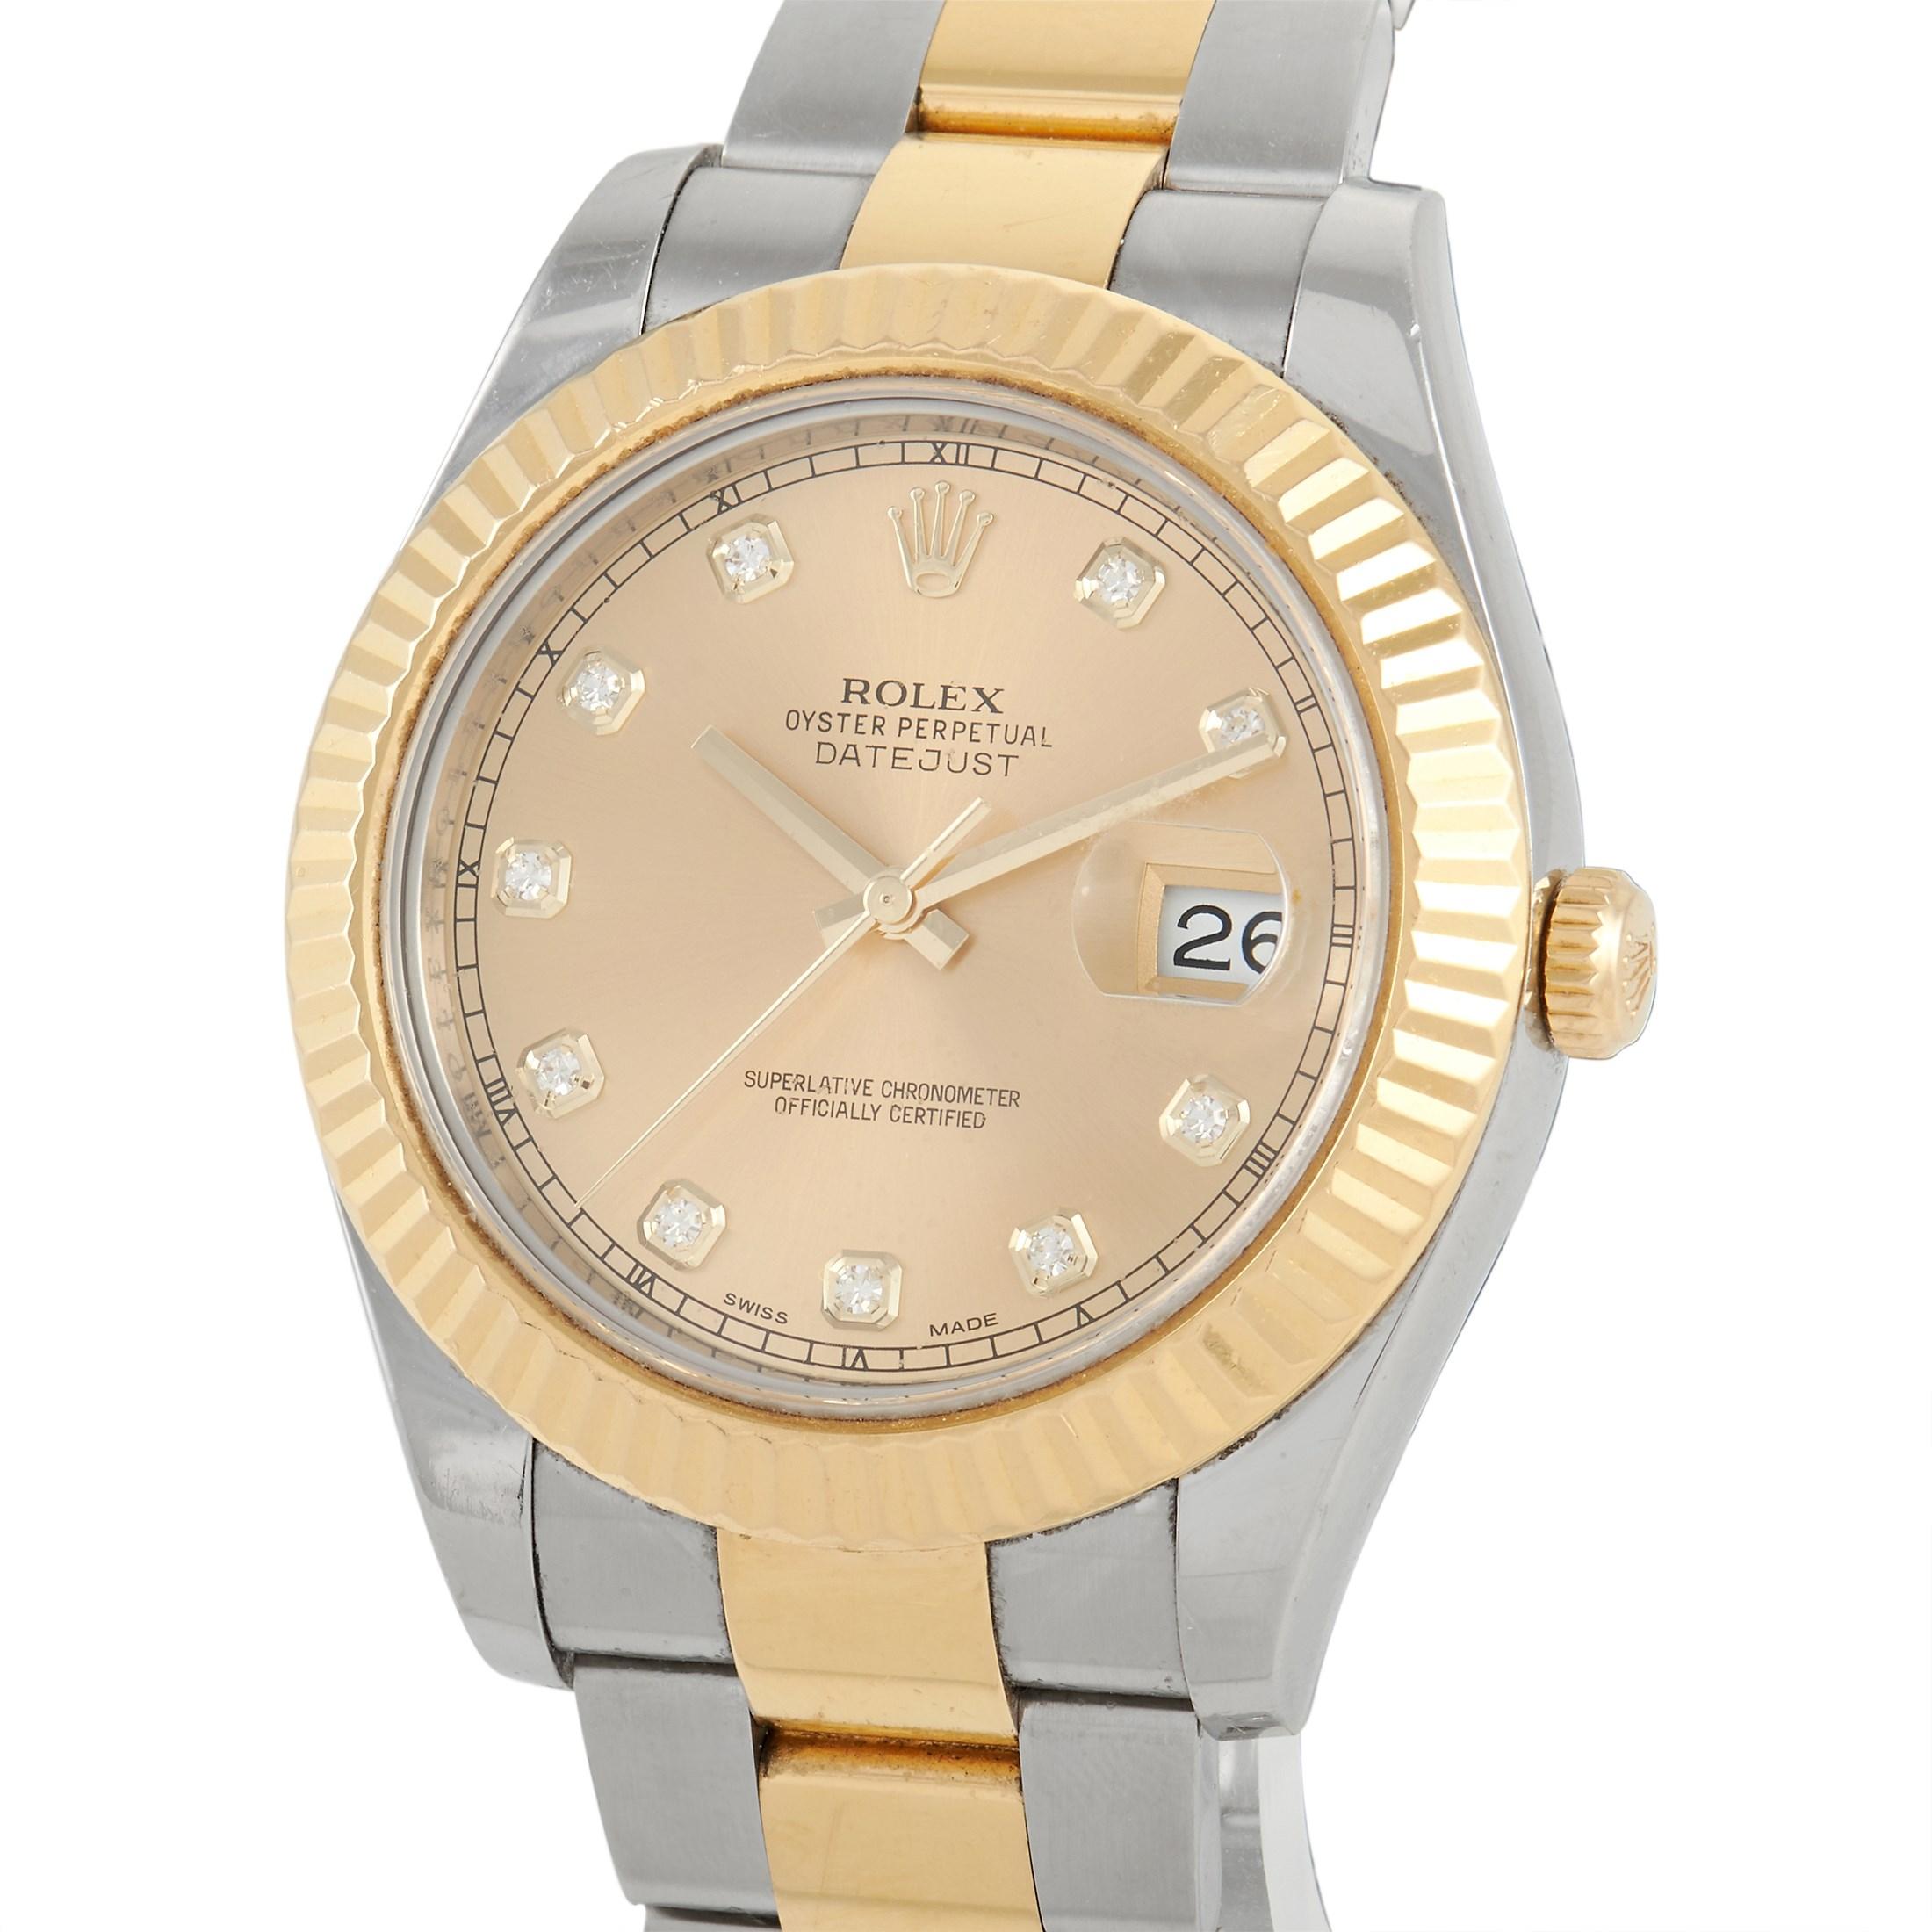 The Rolex Datejust Watch, reference number 116333, epitomizes the luxury brand’s commitment to excellence. 

Made from a classic pairing of 18K Yellow Gold and Stainless Steel, this timepiece’s 36mm case is elegantly accented by a fluted 18K Yellow